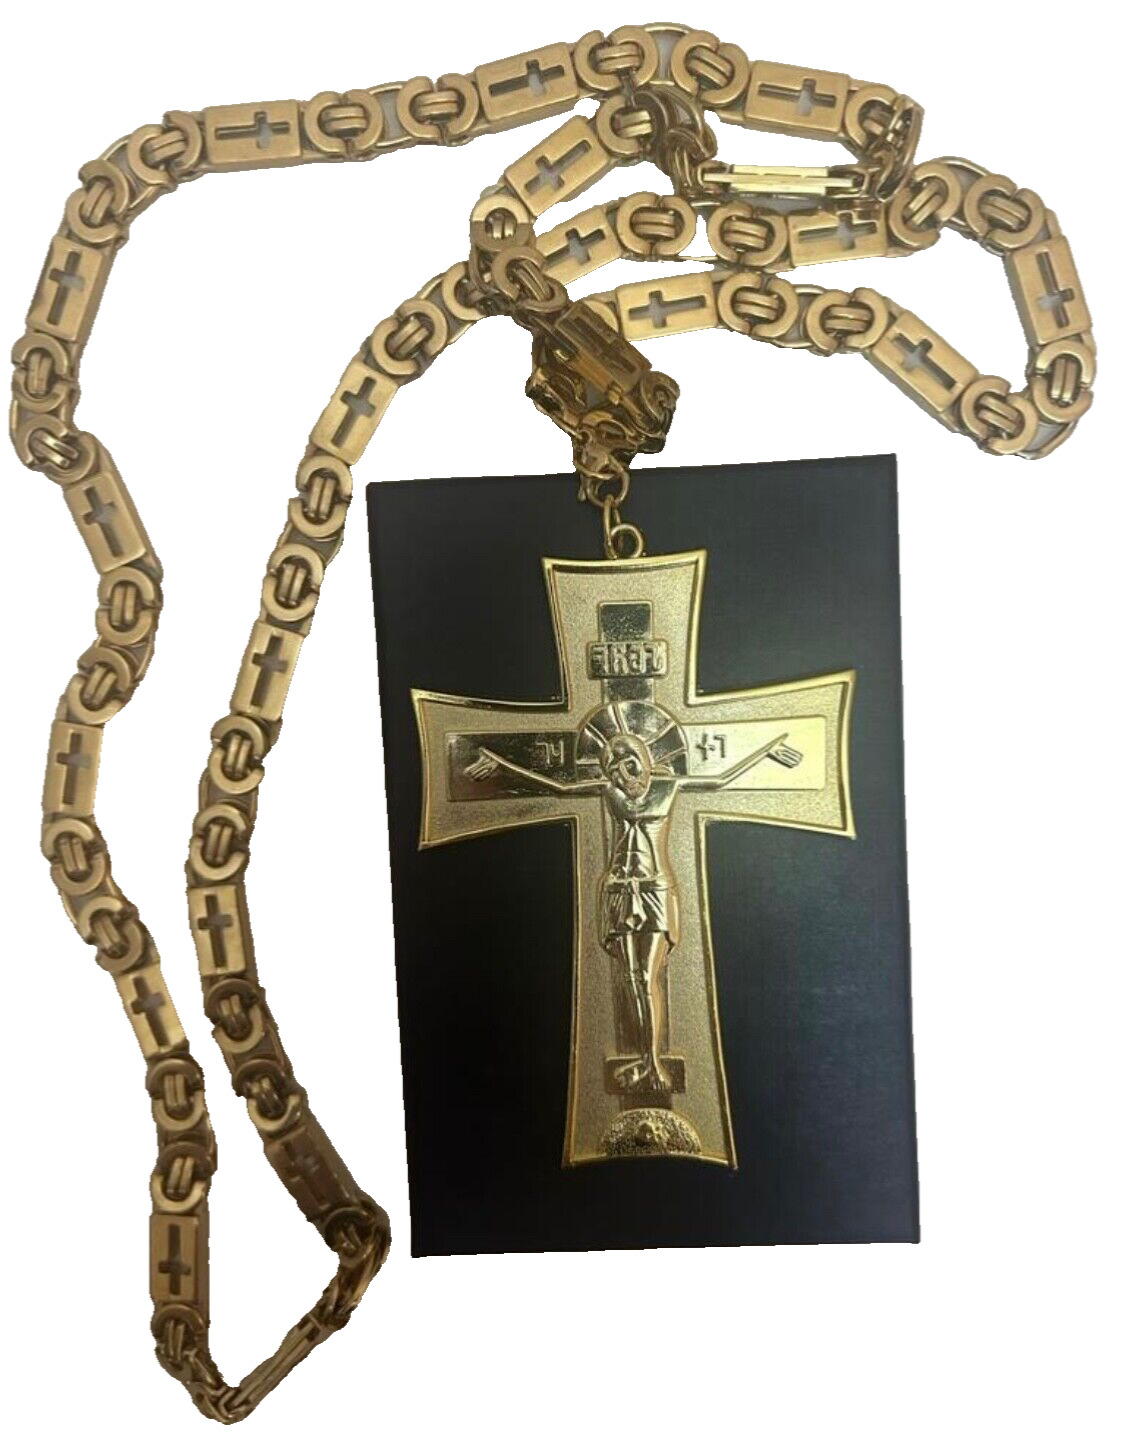 Orthodox Christian priest Bishop Gold plated pectoral cross with chain